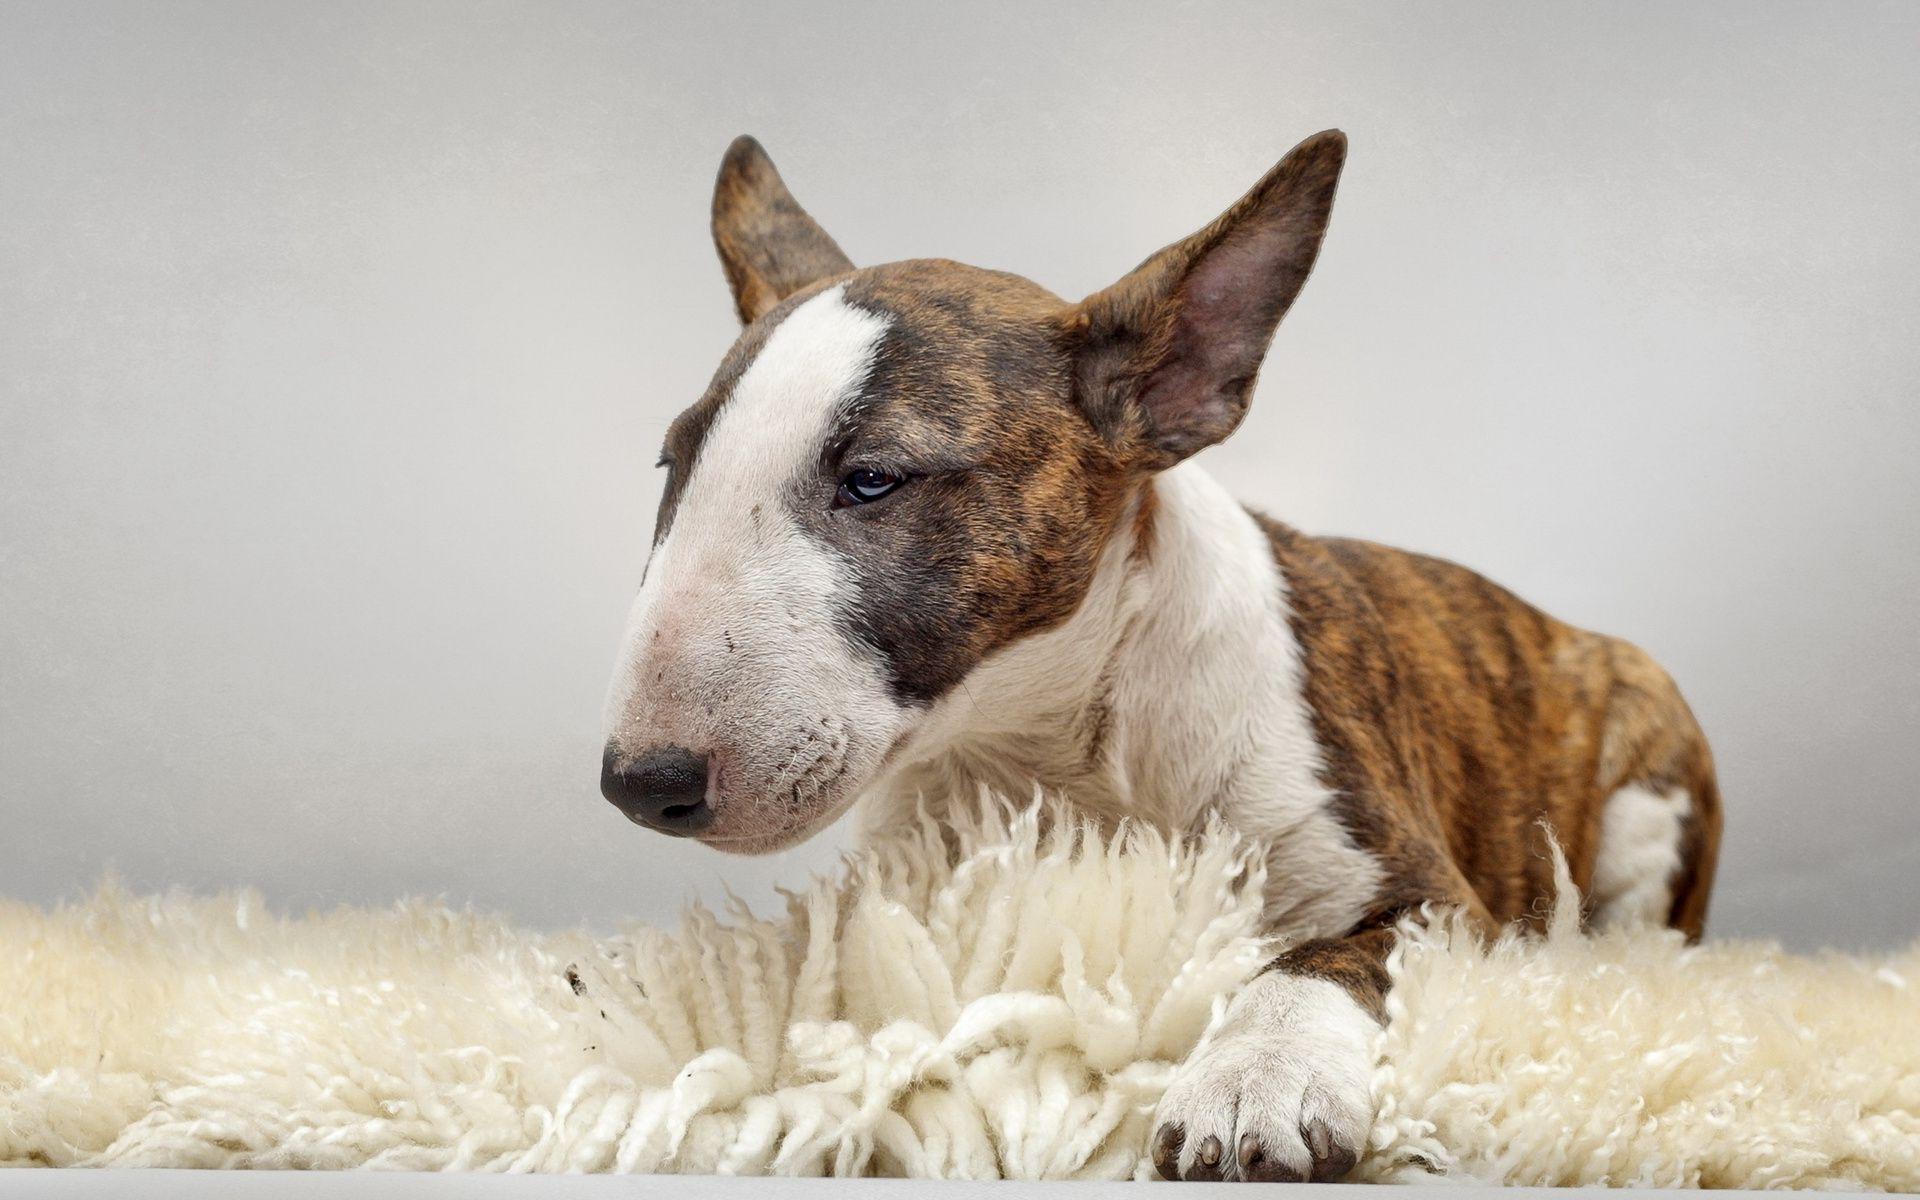 Bull Terrier Wallpaper Image Photo Picture Background